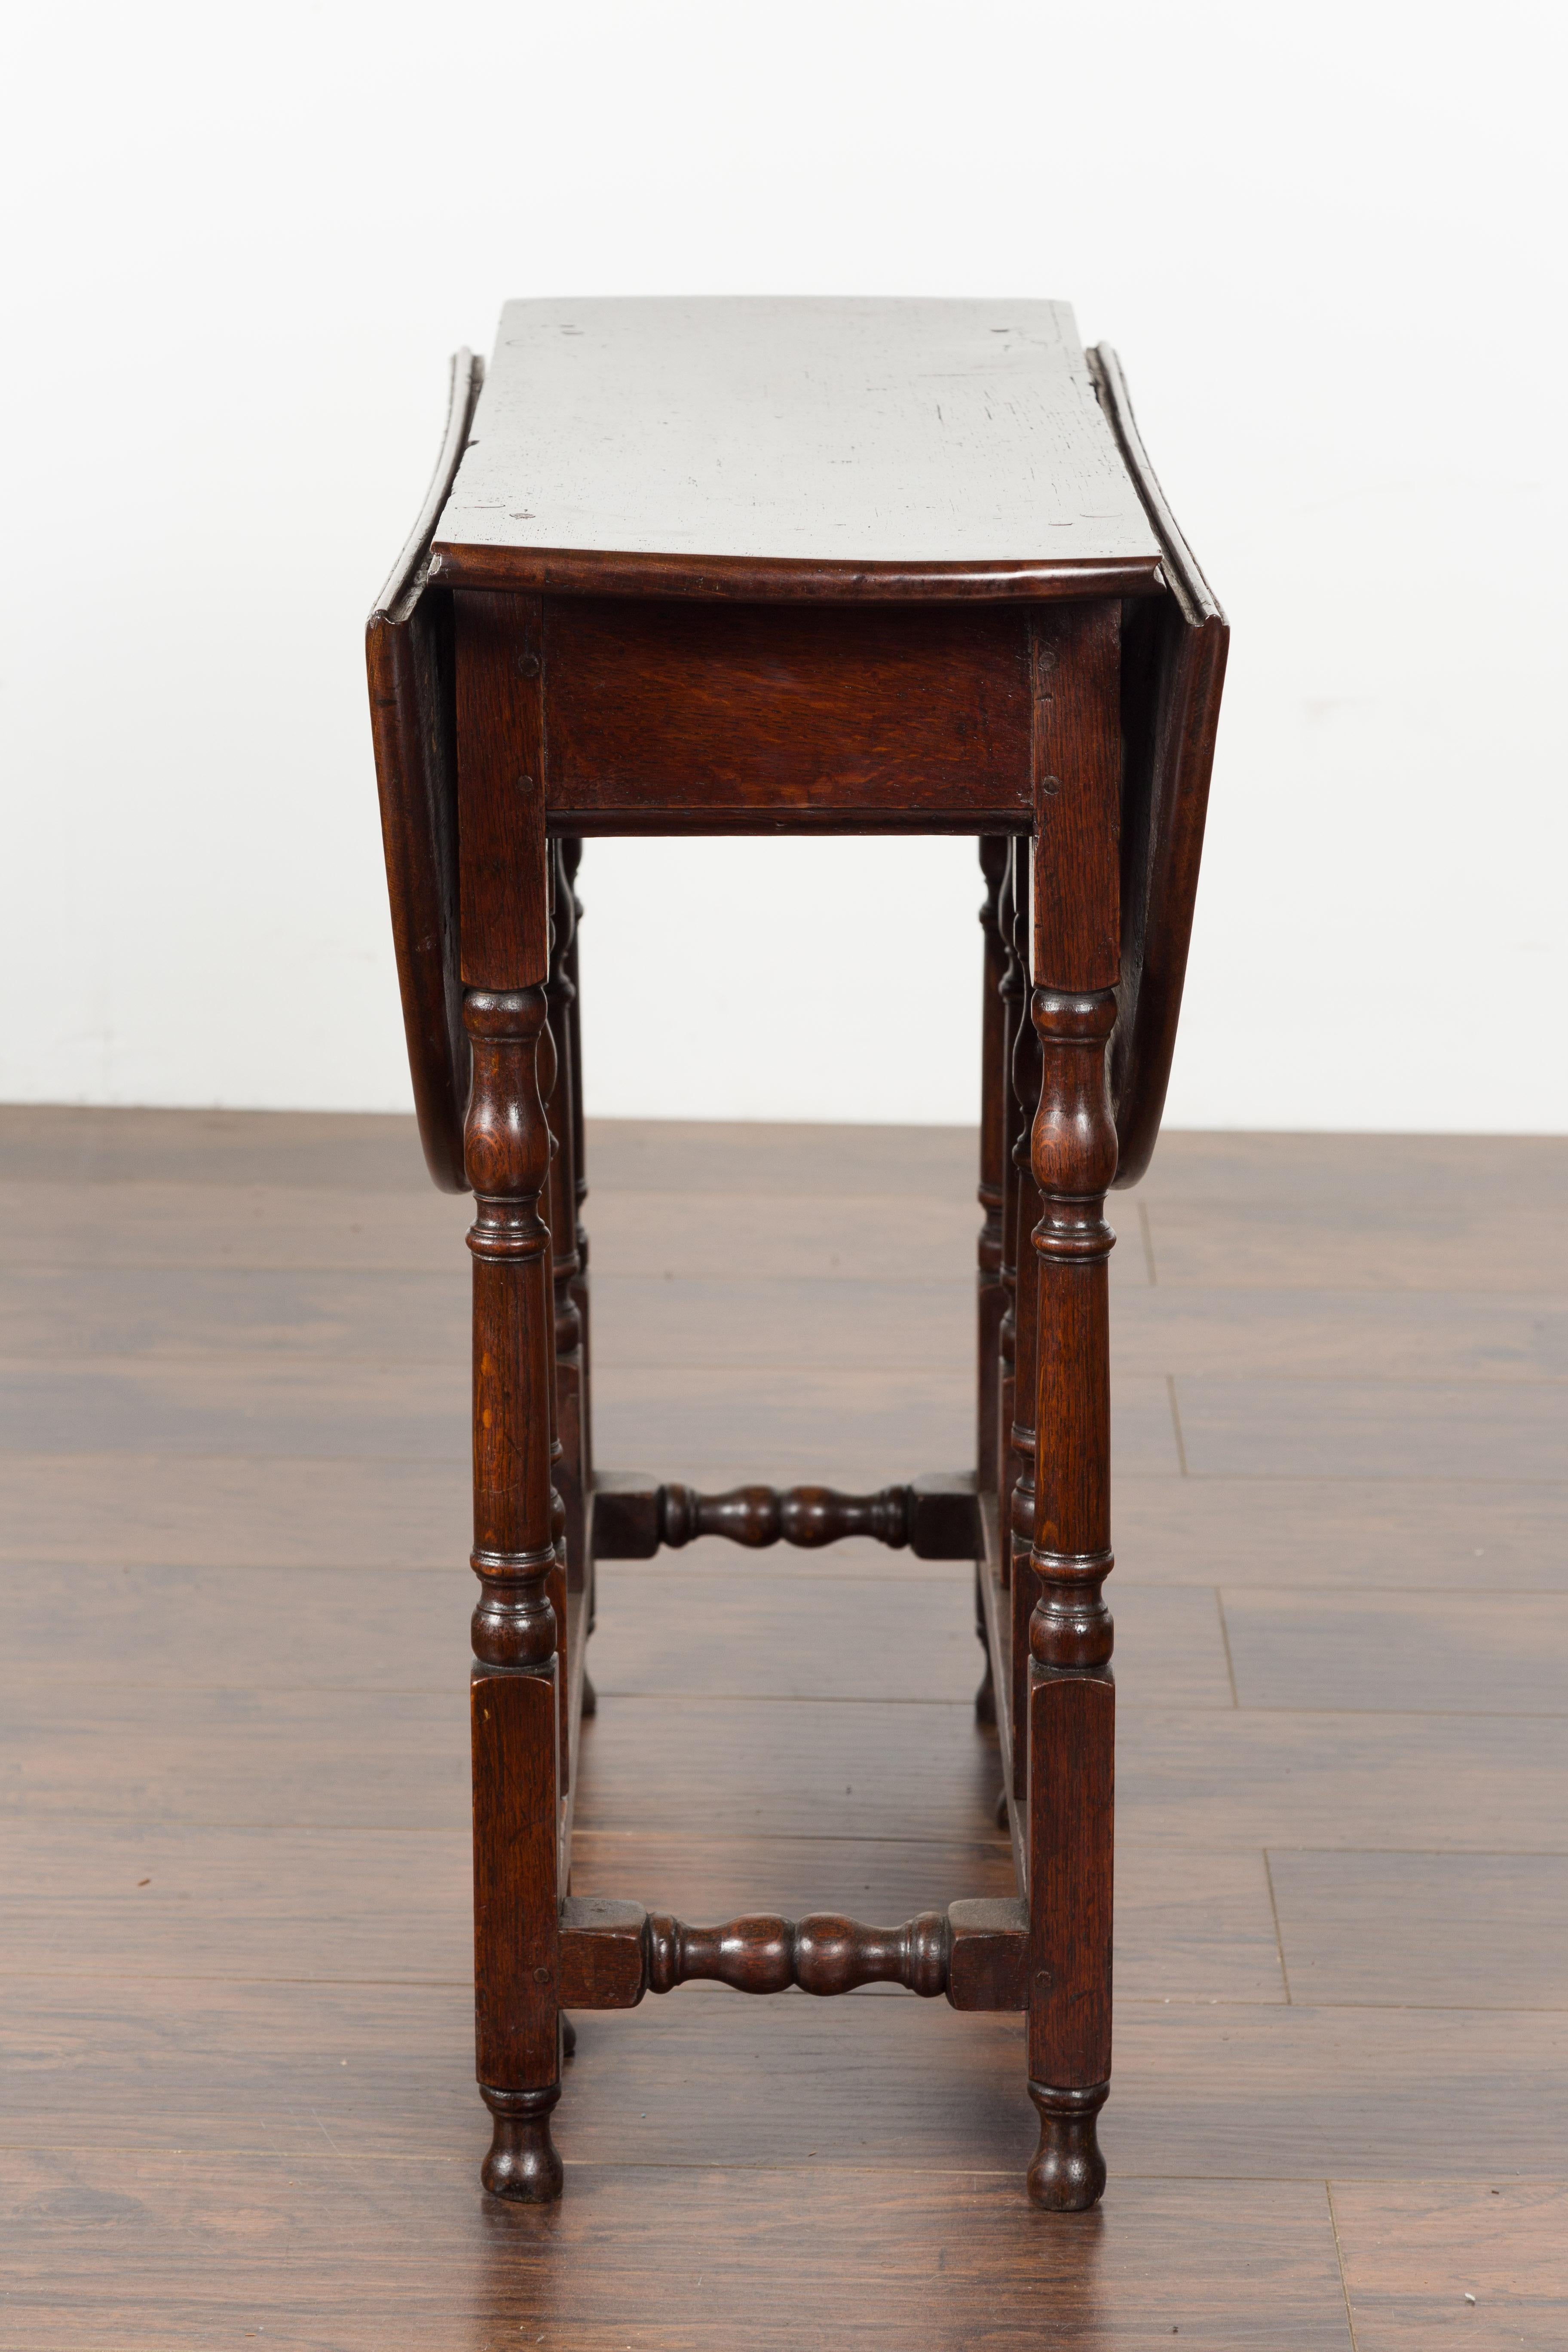 Petite English Oval Oak 19th Century Drop-Leaf Table with Baluster Legs For Sale 12